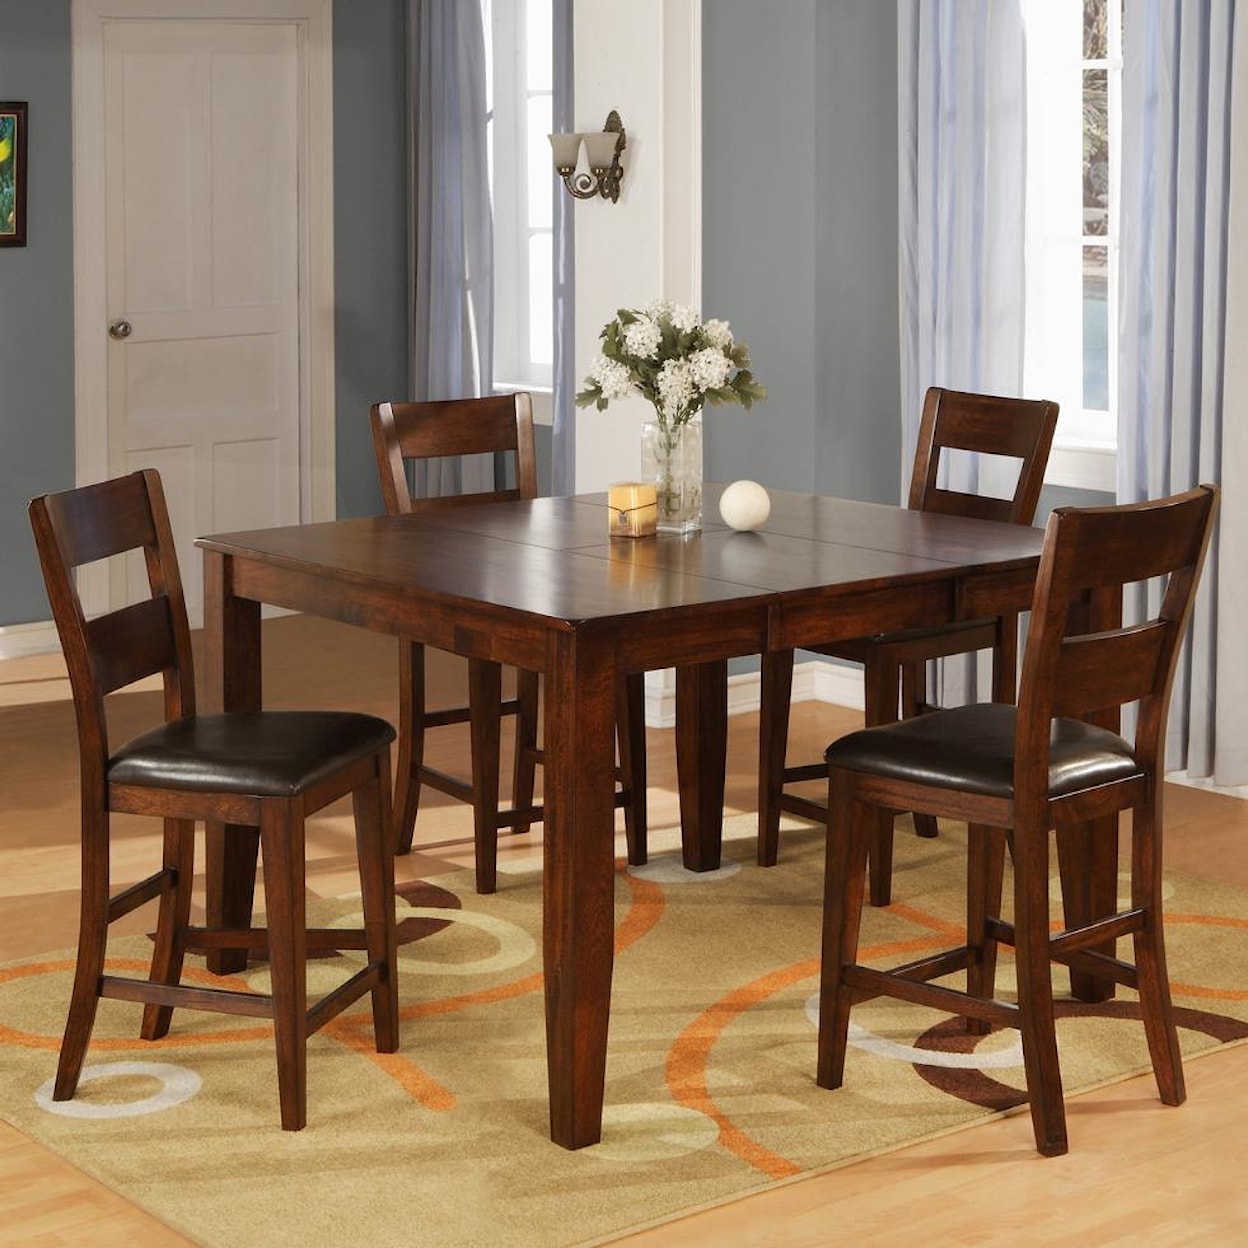 Holland House 1279 Counter Pub Table Set with 4 Bar Stools